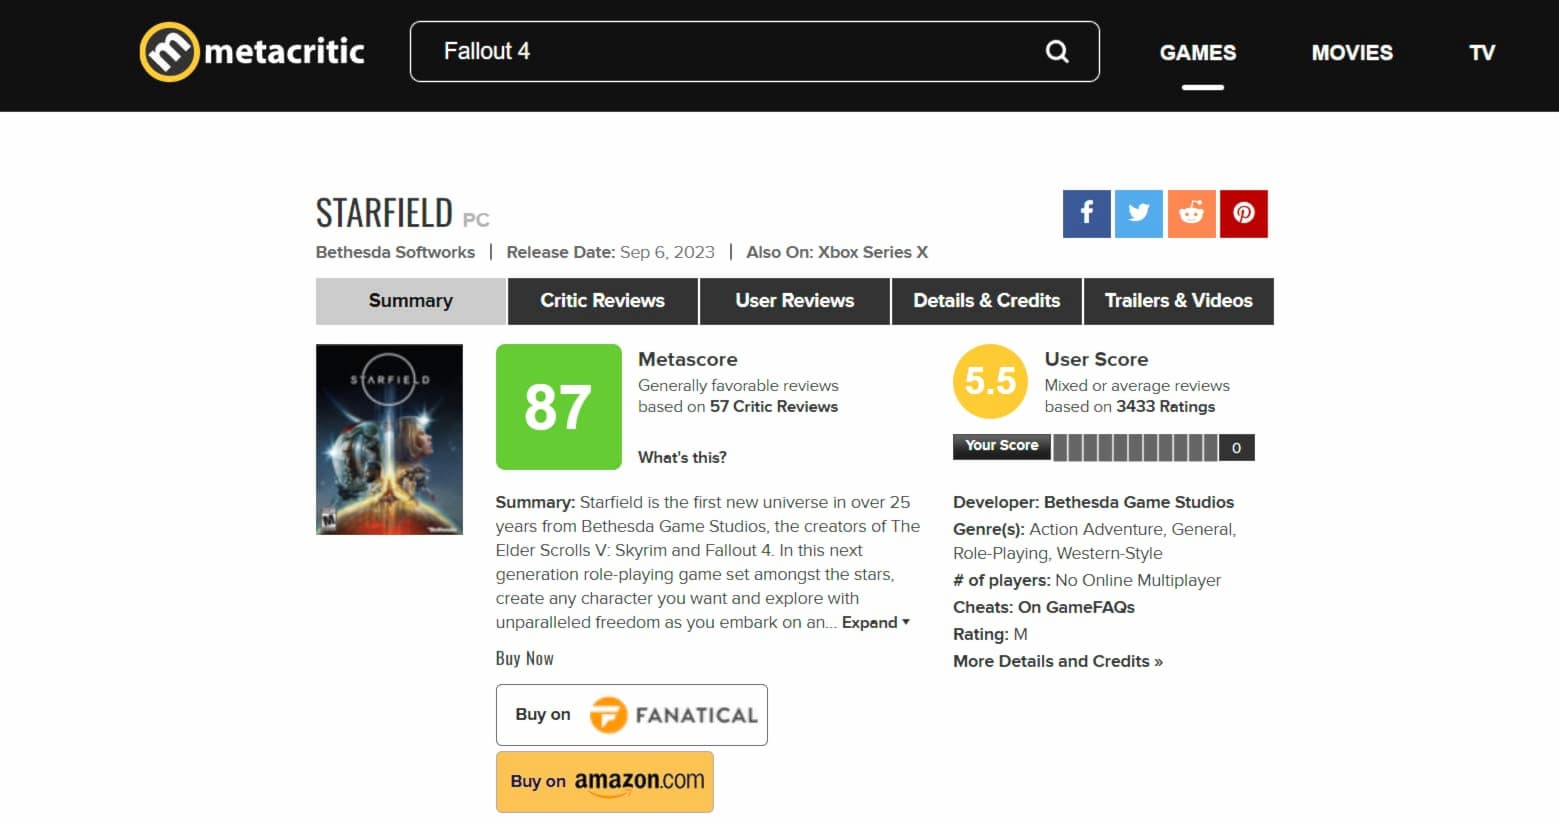 Call of Duty: Modern Warfare 3 is Getting Review Bombed on Metacritic 